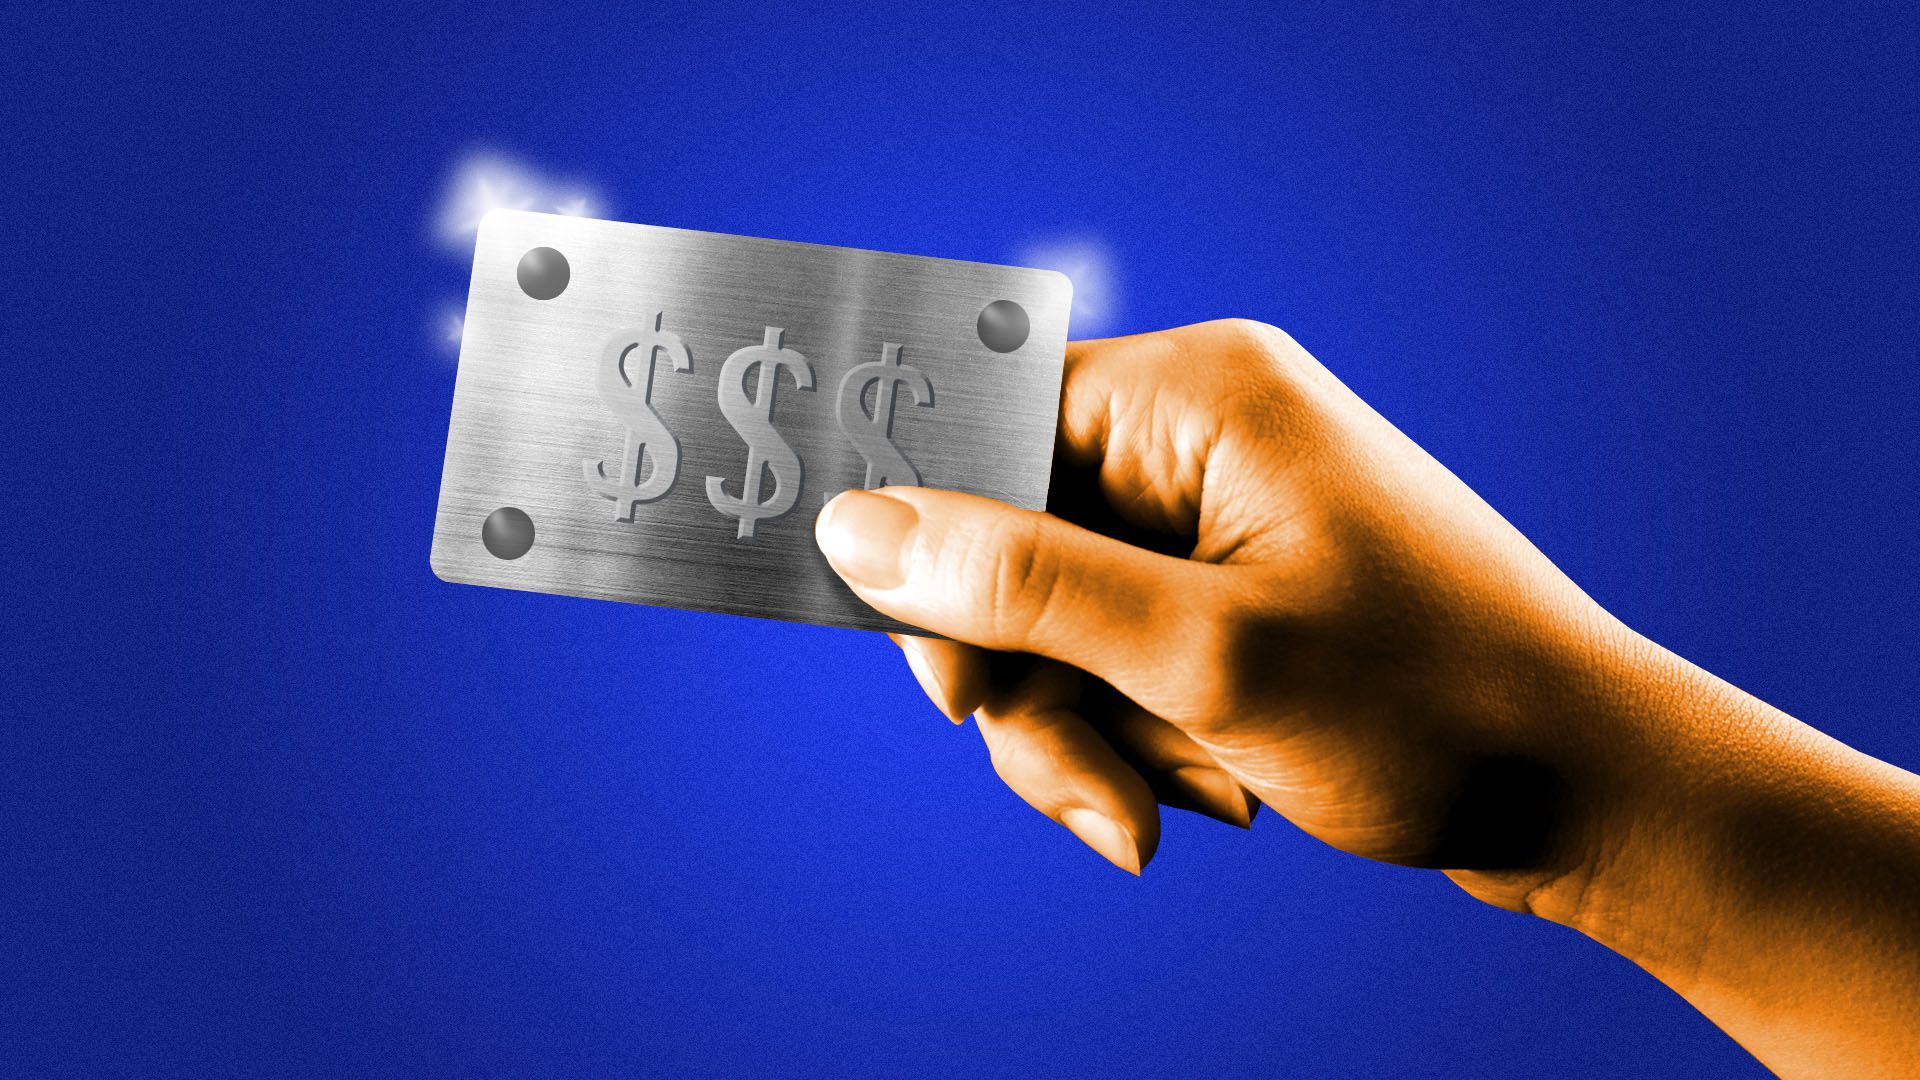 Illustration of a hand holding up a solid metal credit card